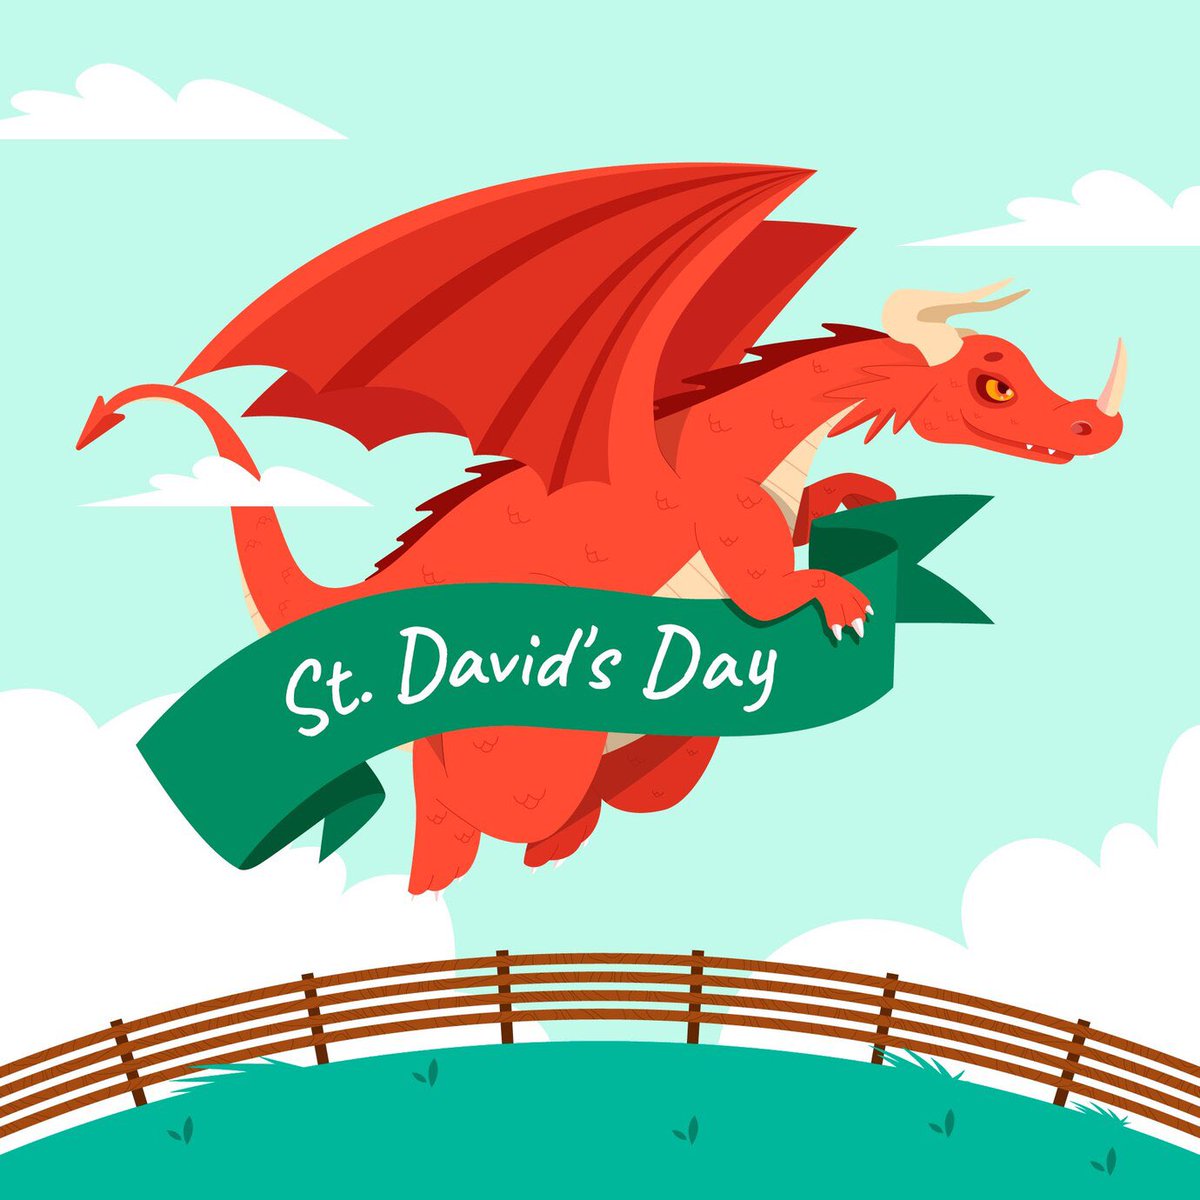 Dydd Gwyl Dewi Hapus - Happy St David’s Day from @HMS_Pegasus, wherever you are around the world 🌍Especially to our @RNReserve friends in @HMSCambria 🏴󠁧󠁢󠁷󠁬󠁳󠁿 #StDavidsDay